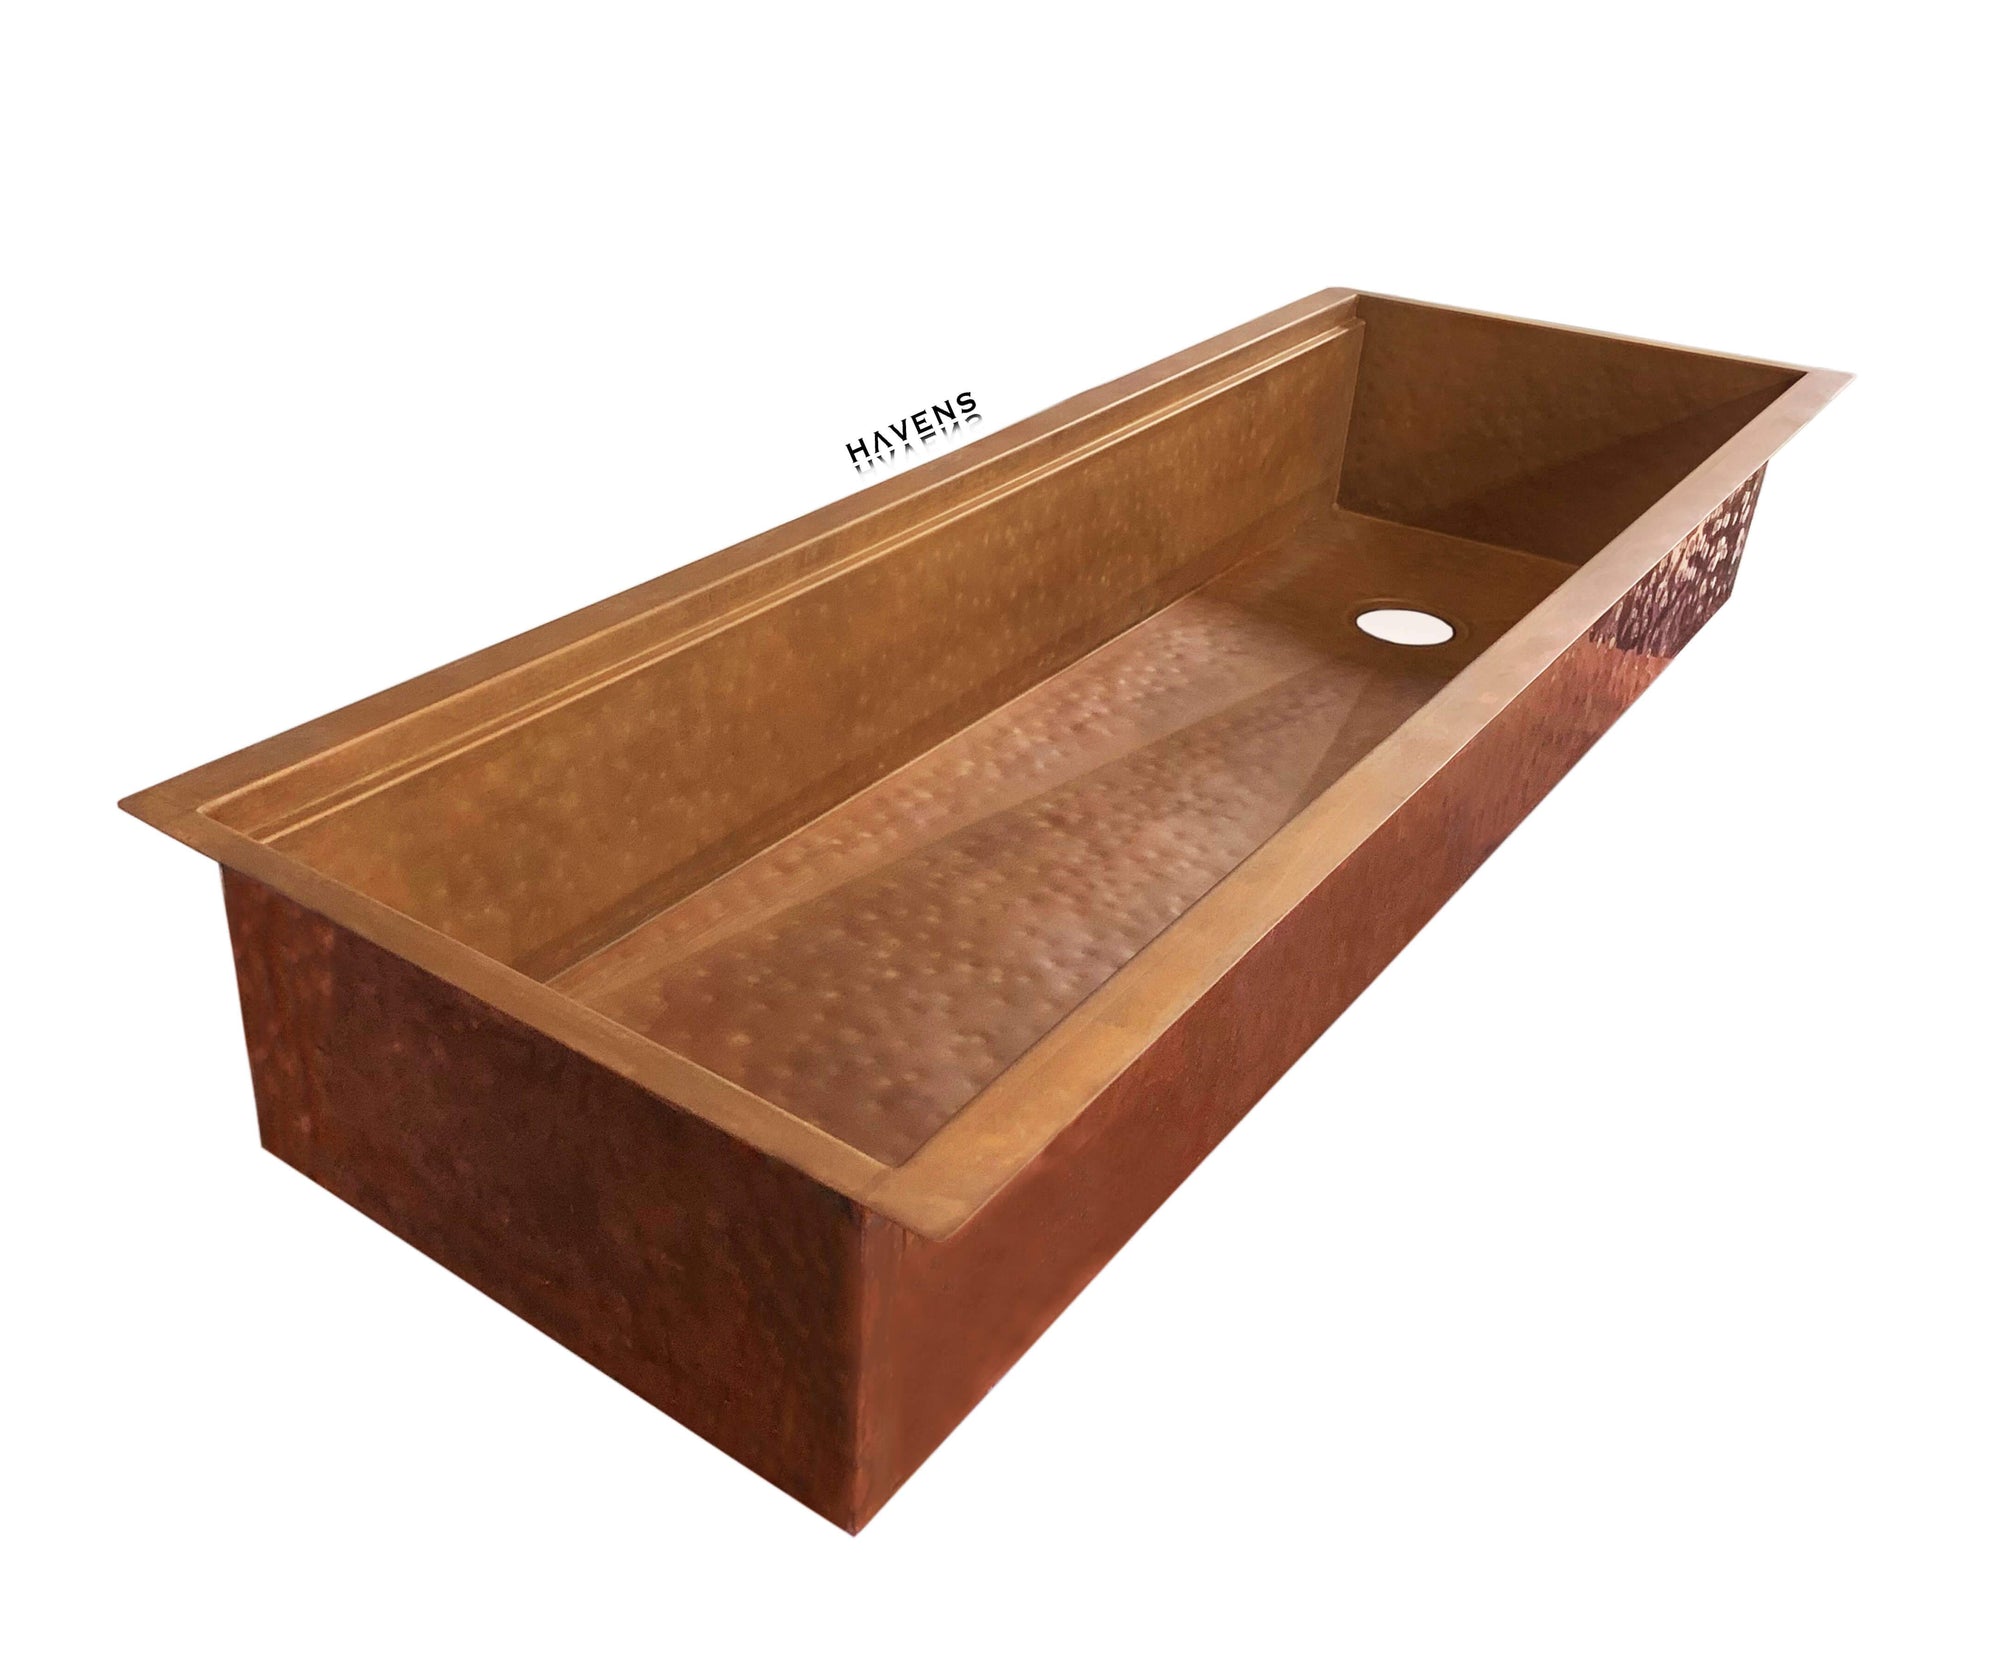 Product image of Hammered Copper trough sink with advanced sink ledge